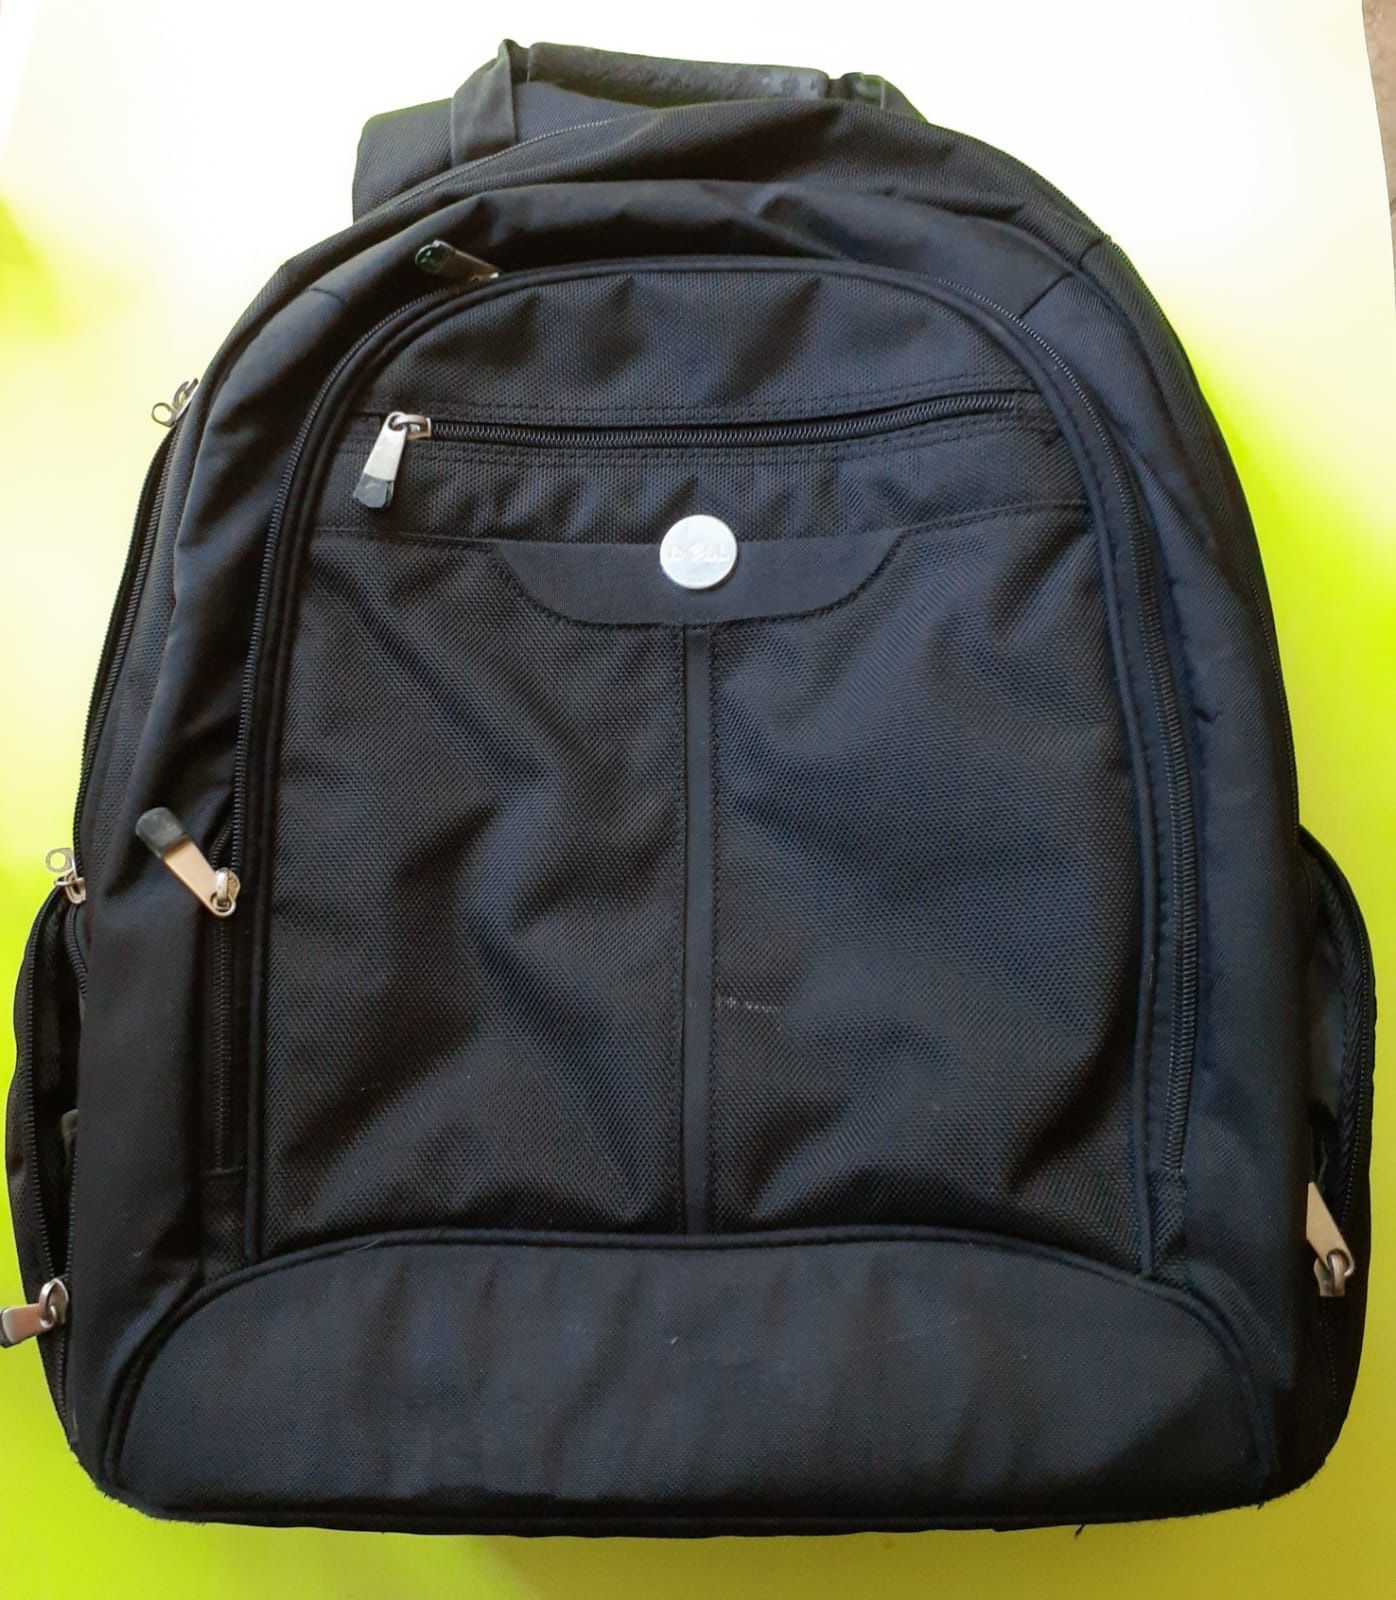 DELL LAPTOP BACKPACK IN GREAT CONDITION